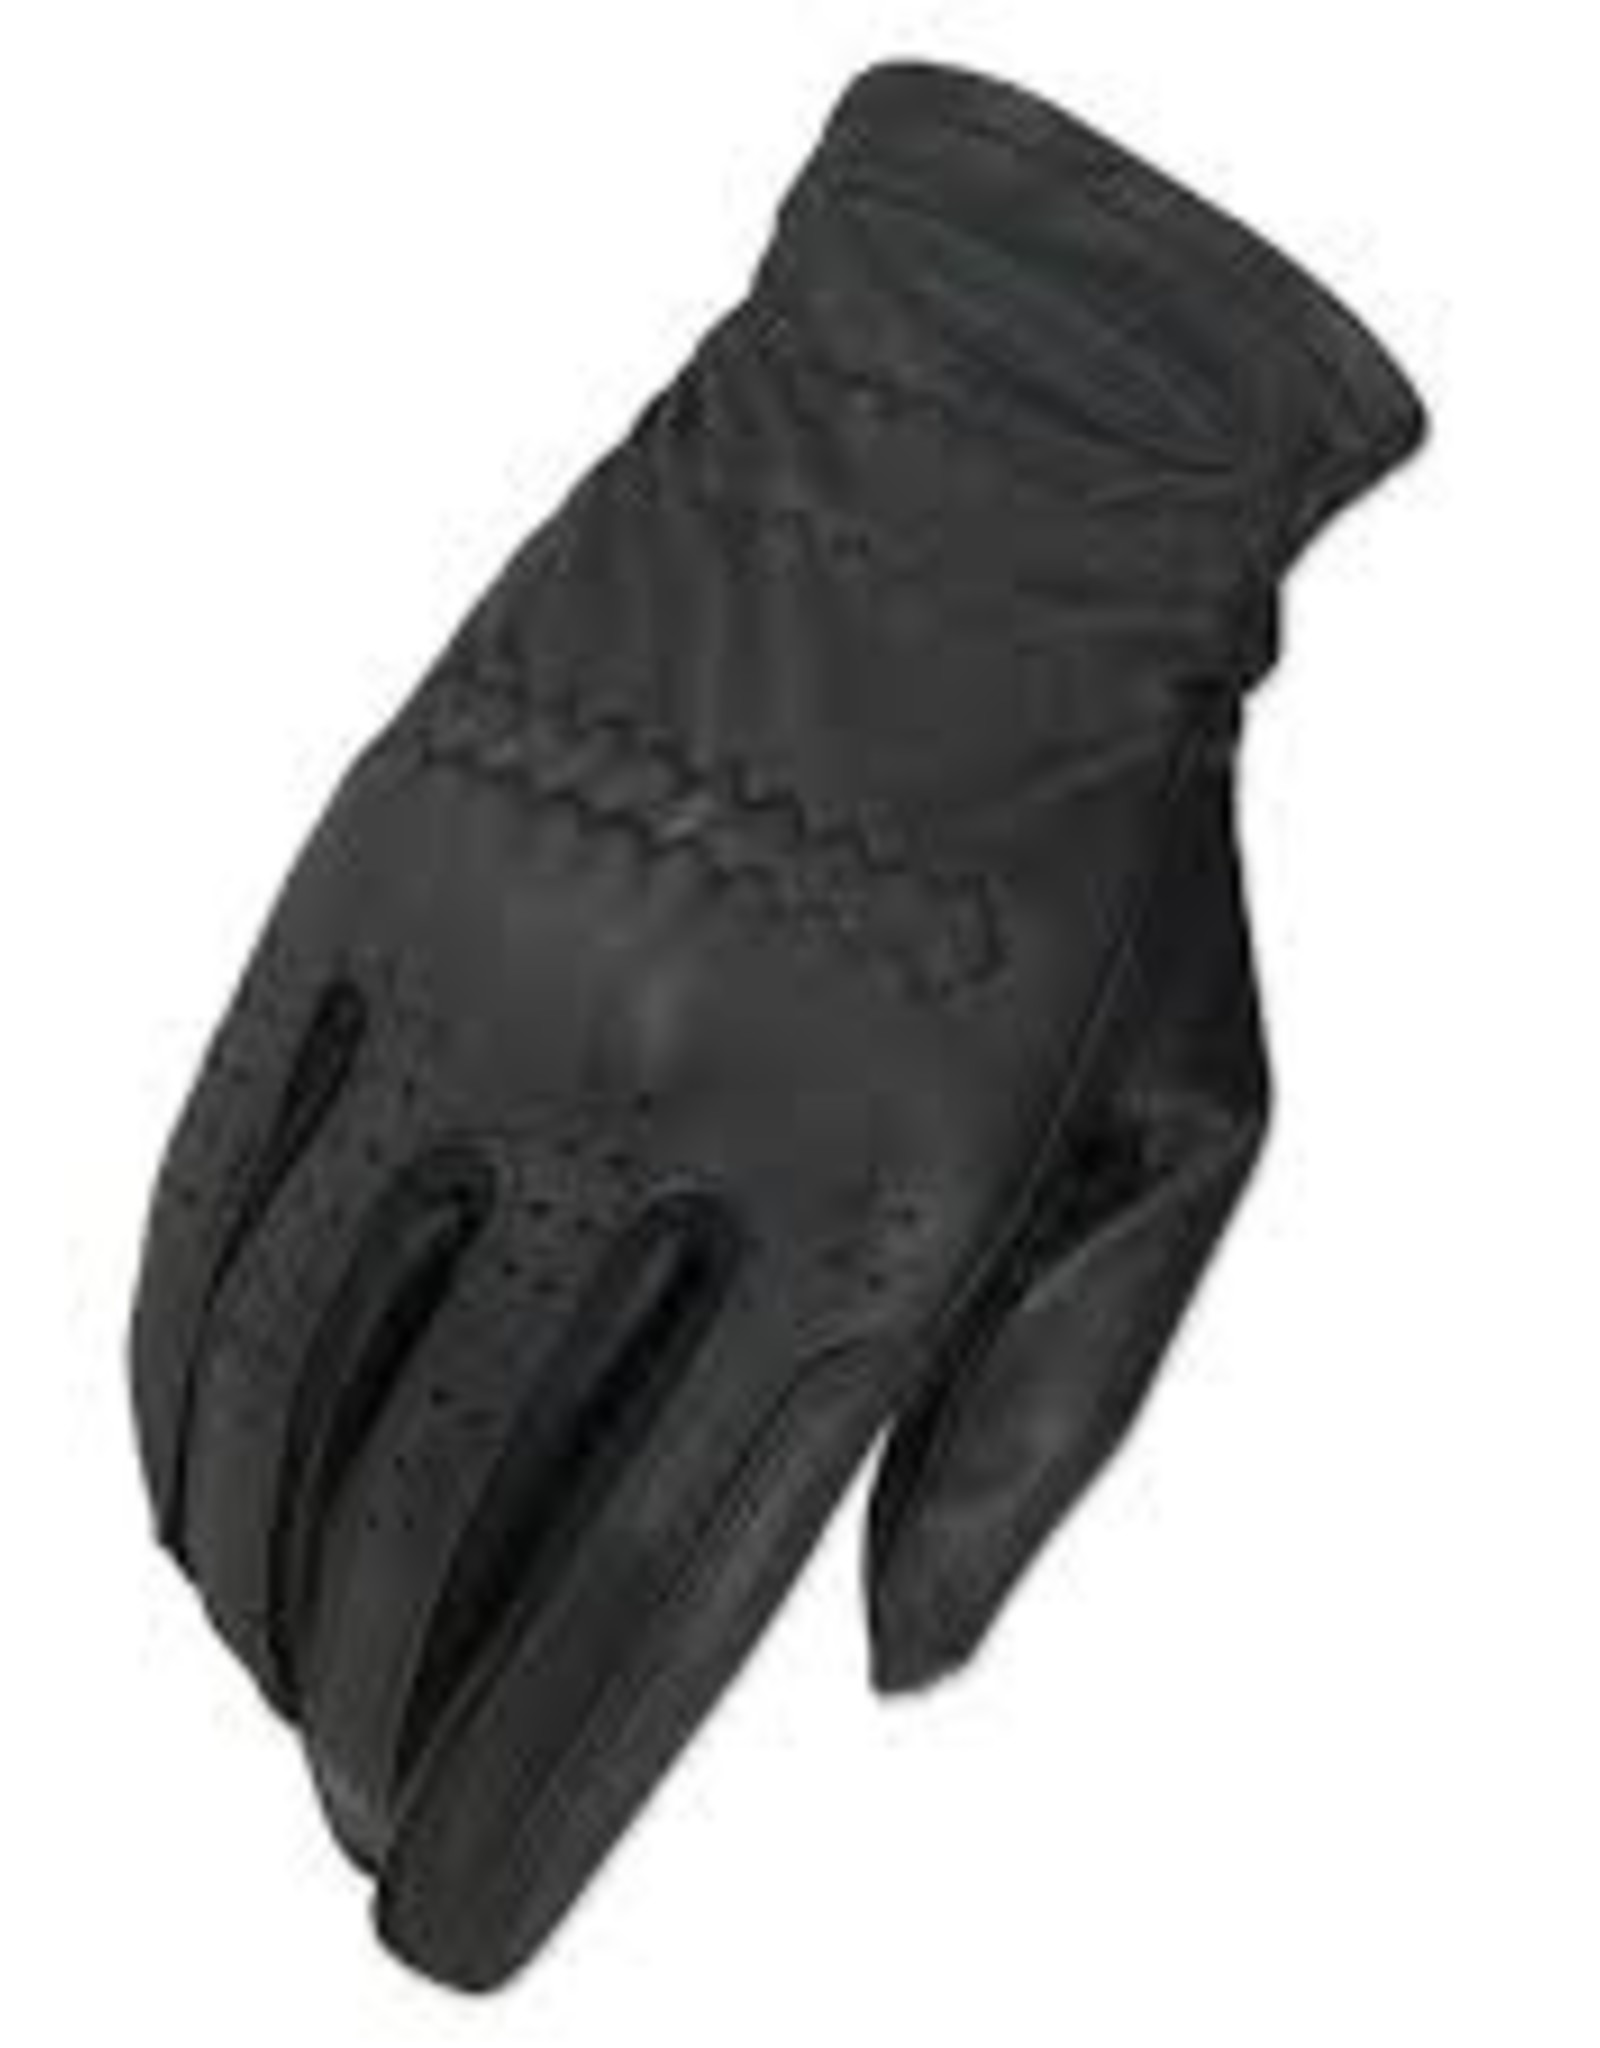 Heritage Riding Gloves Pro Fit